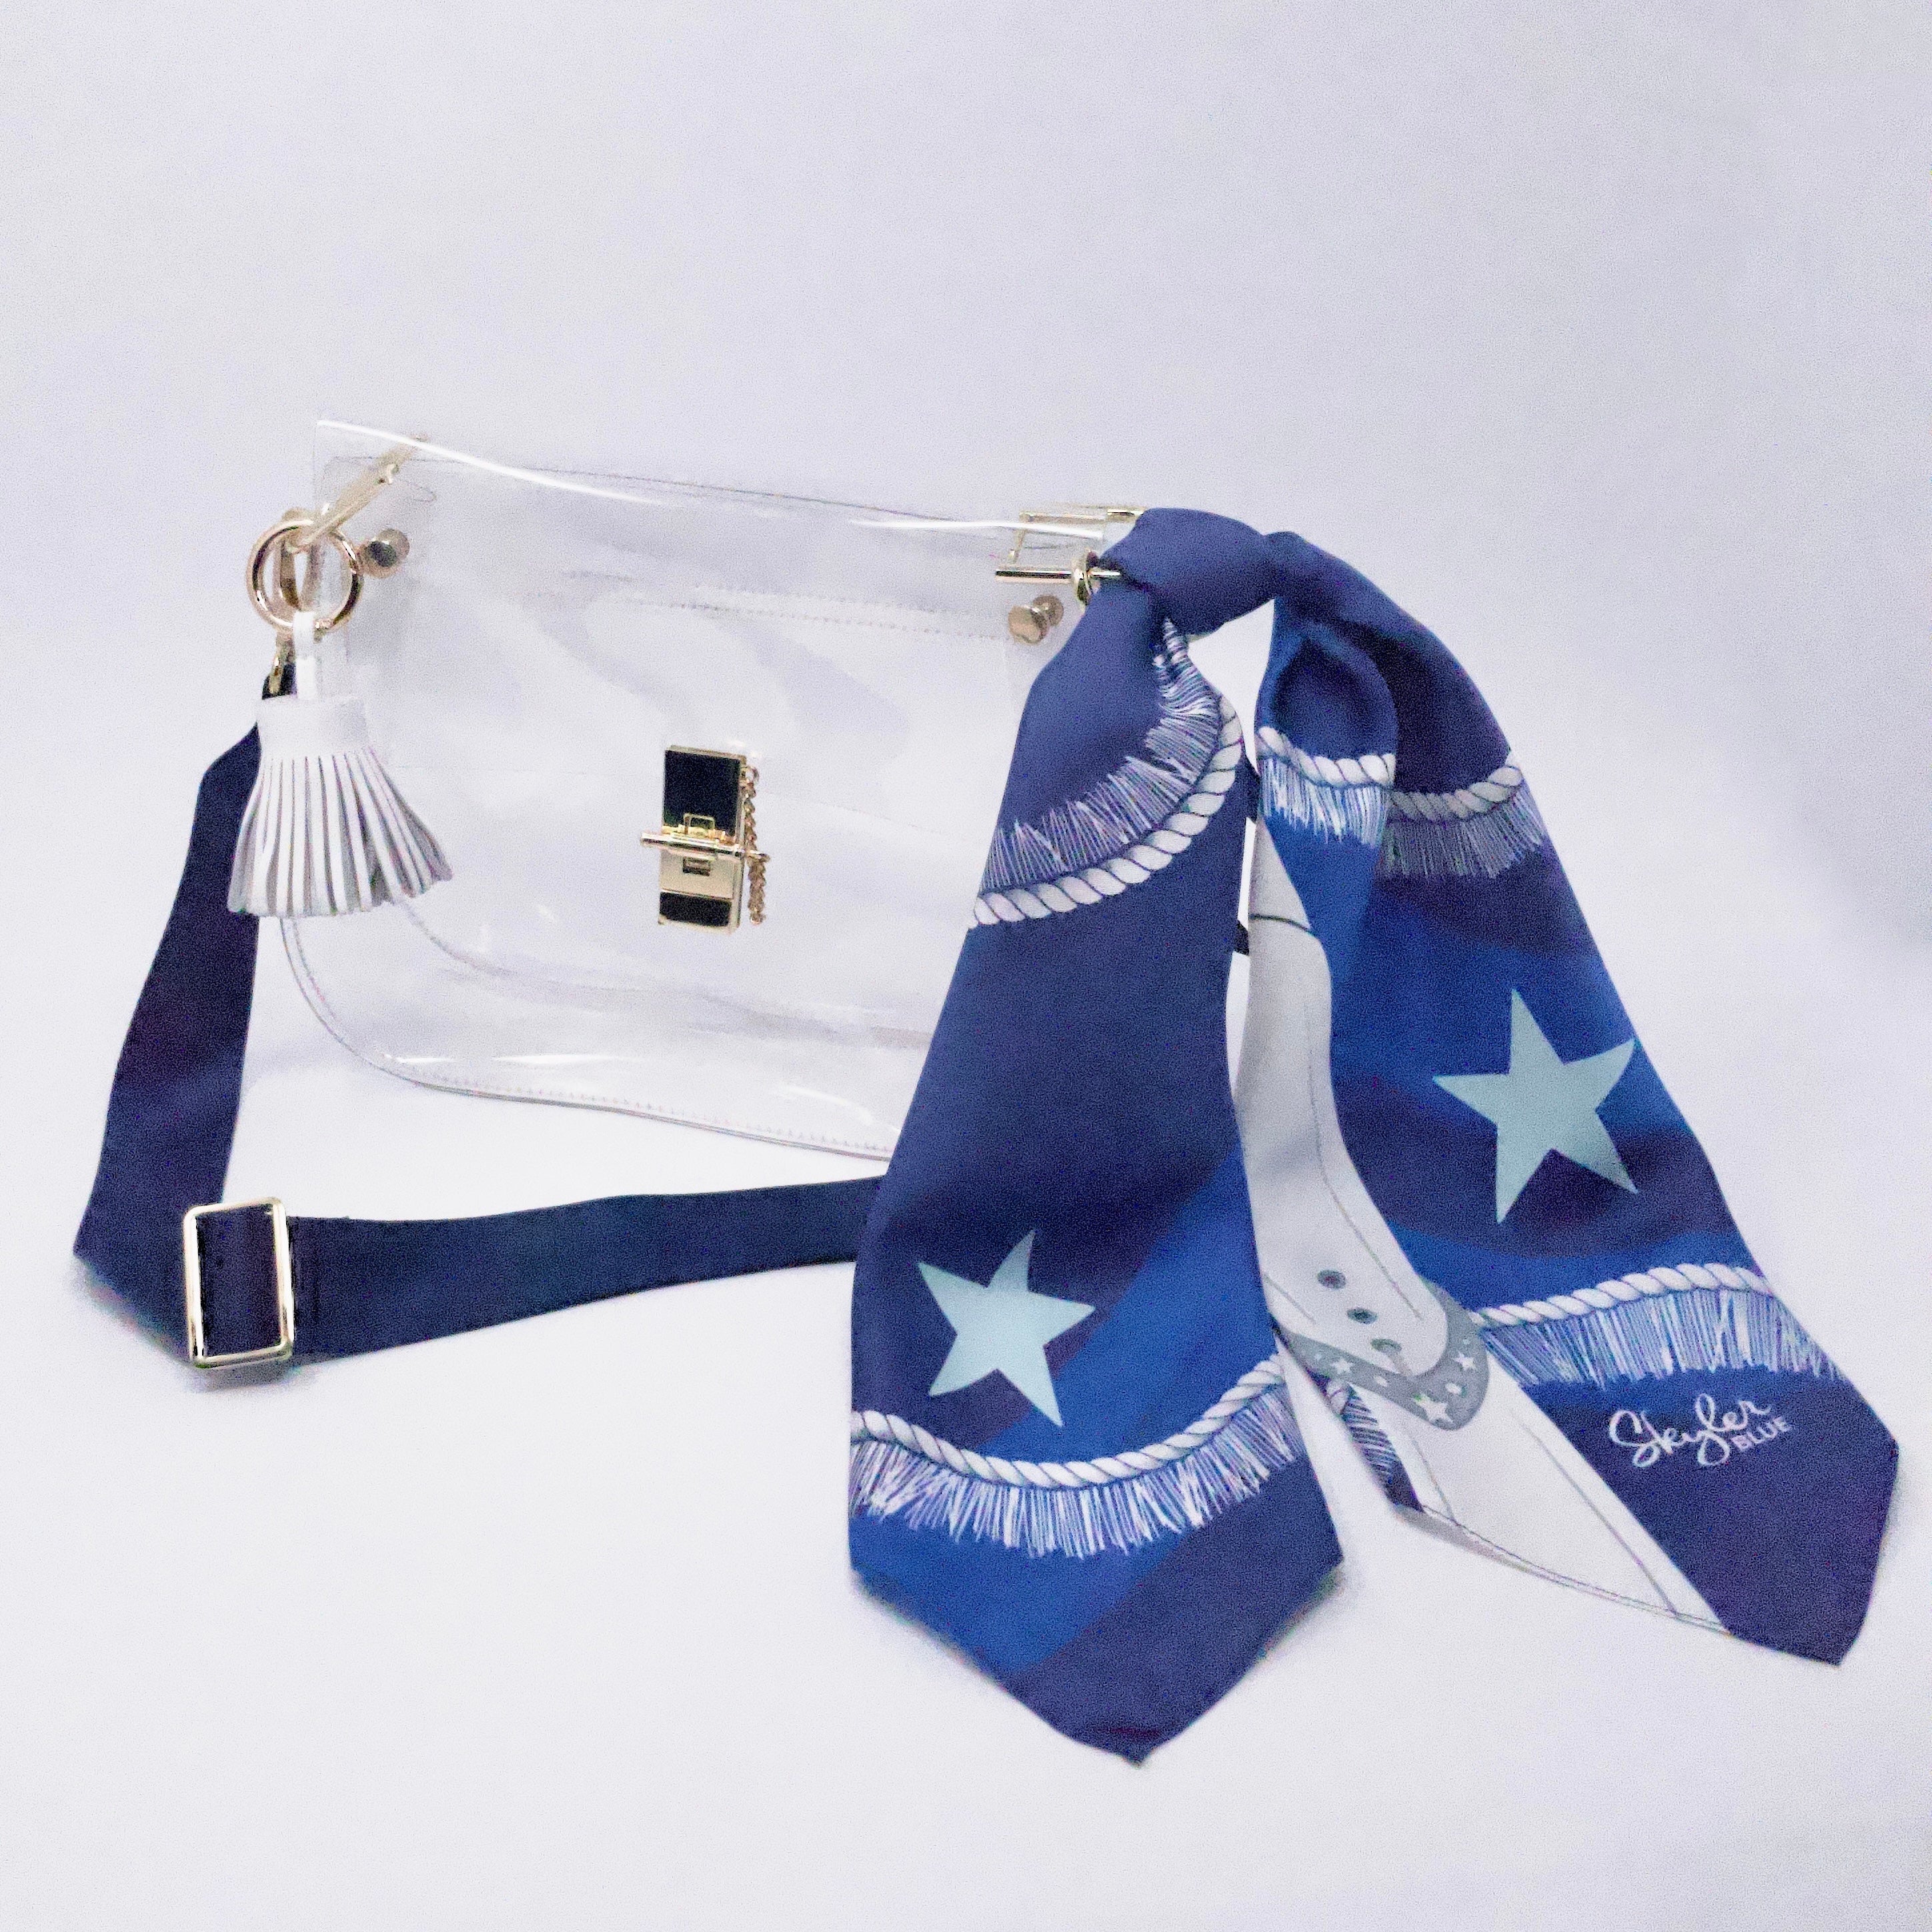 Skyler Blue’s The Dallas 002 Medium Saddle Clear Bag stadium approved clear bag / clear purse including adjustable, nylon webbing shoulder or crossbody strap with herringbone weave and gold hardware, 60-centimeter 100% silk twill scarf, and 100% genuine leather tassel. 